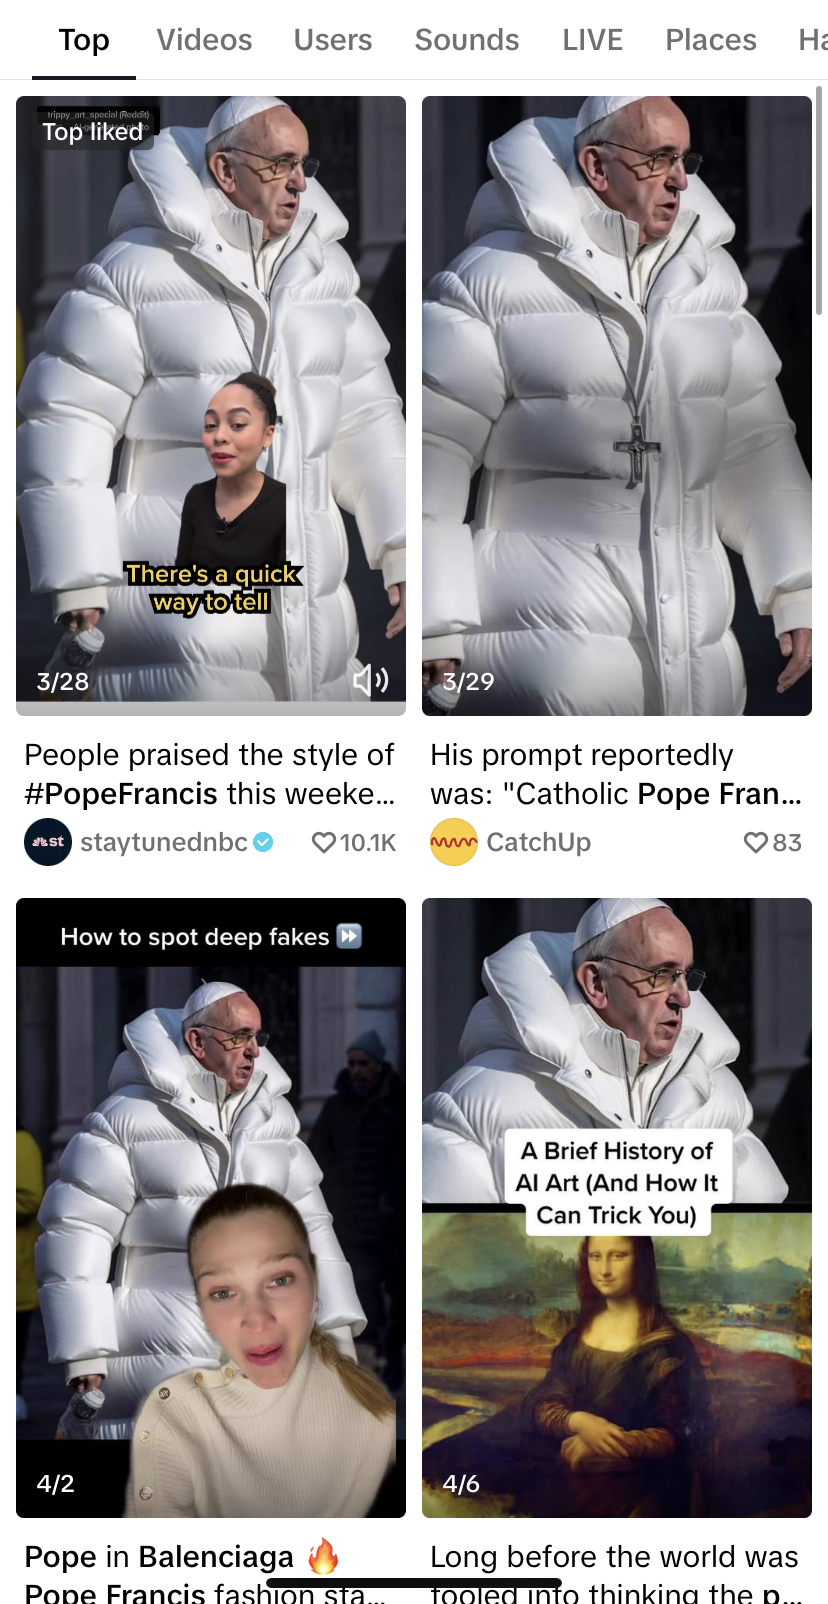 TikTok feed showing several videos talking about the controversy of Pope Francis deepfake.